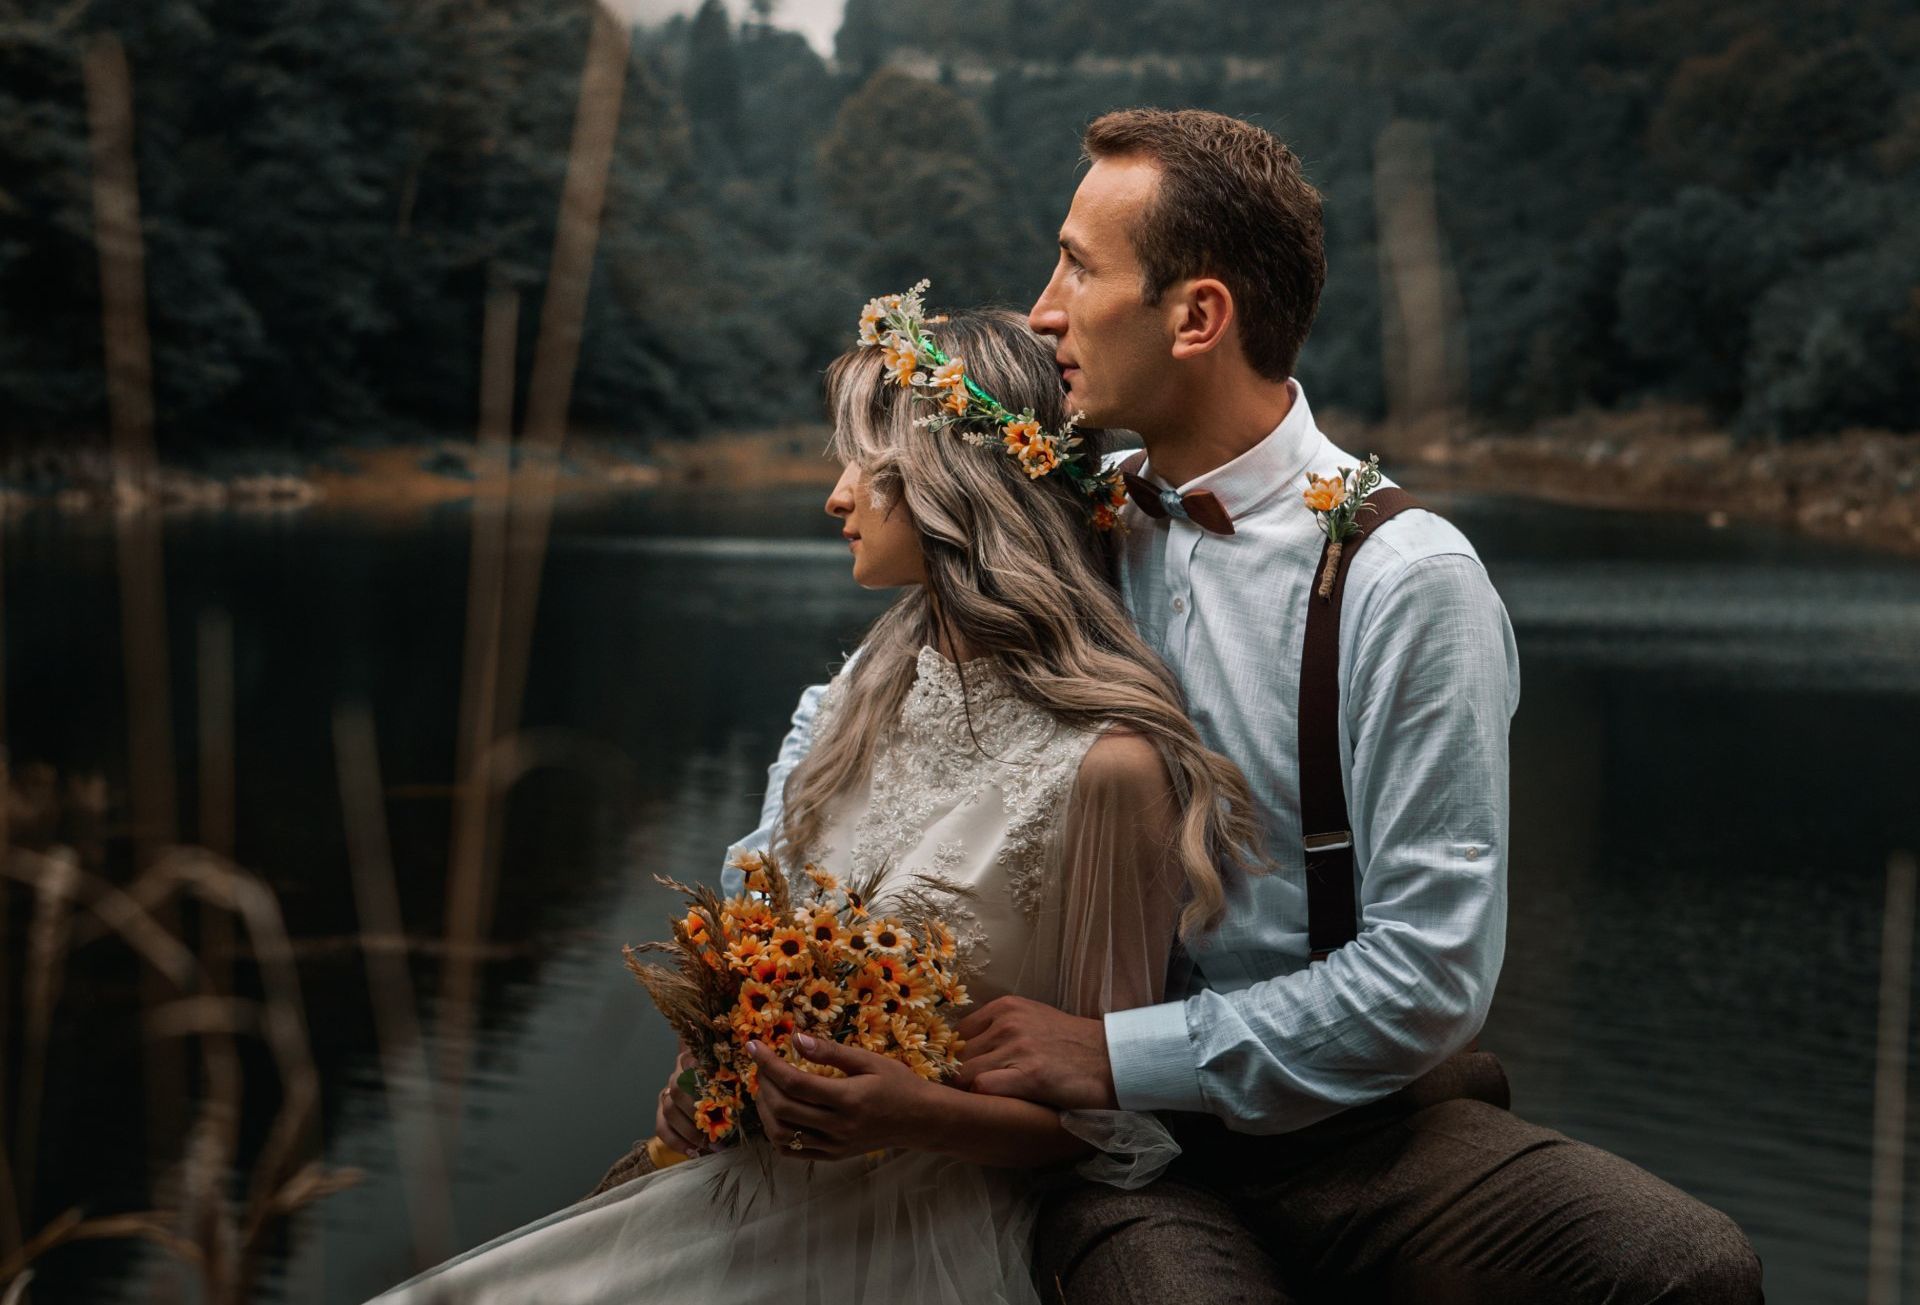 A couple sits by a lake, where the bride, adorned with an orange flower crown, is held by her groom.